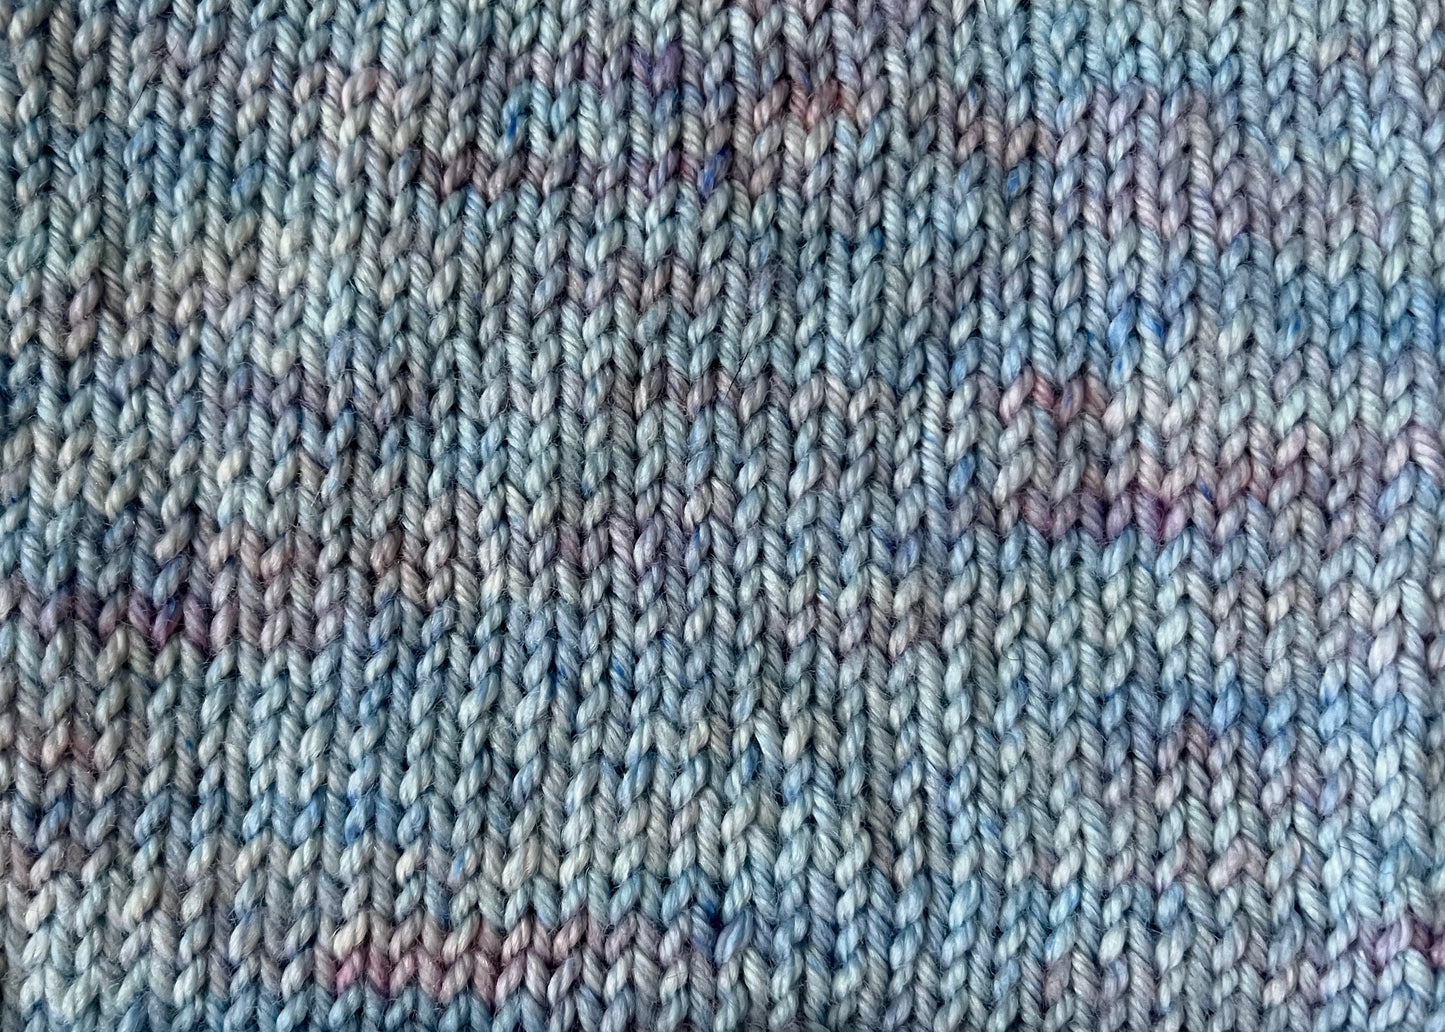 Dyed to order: Winter Sunrise